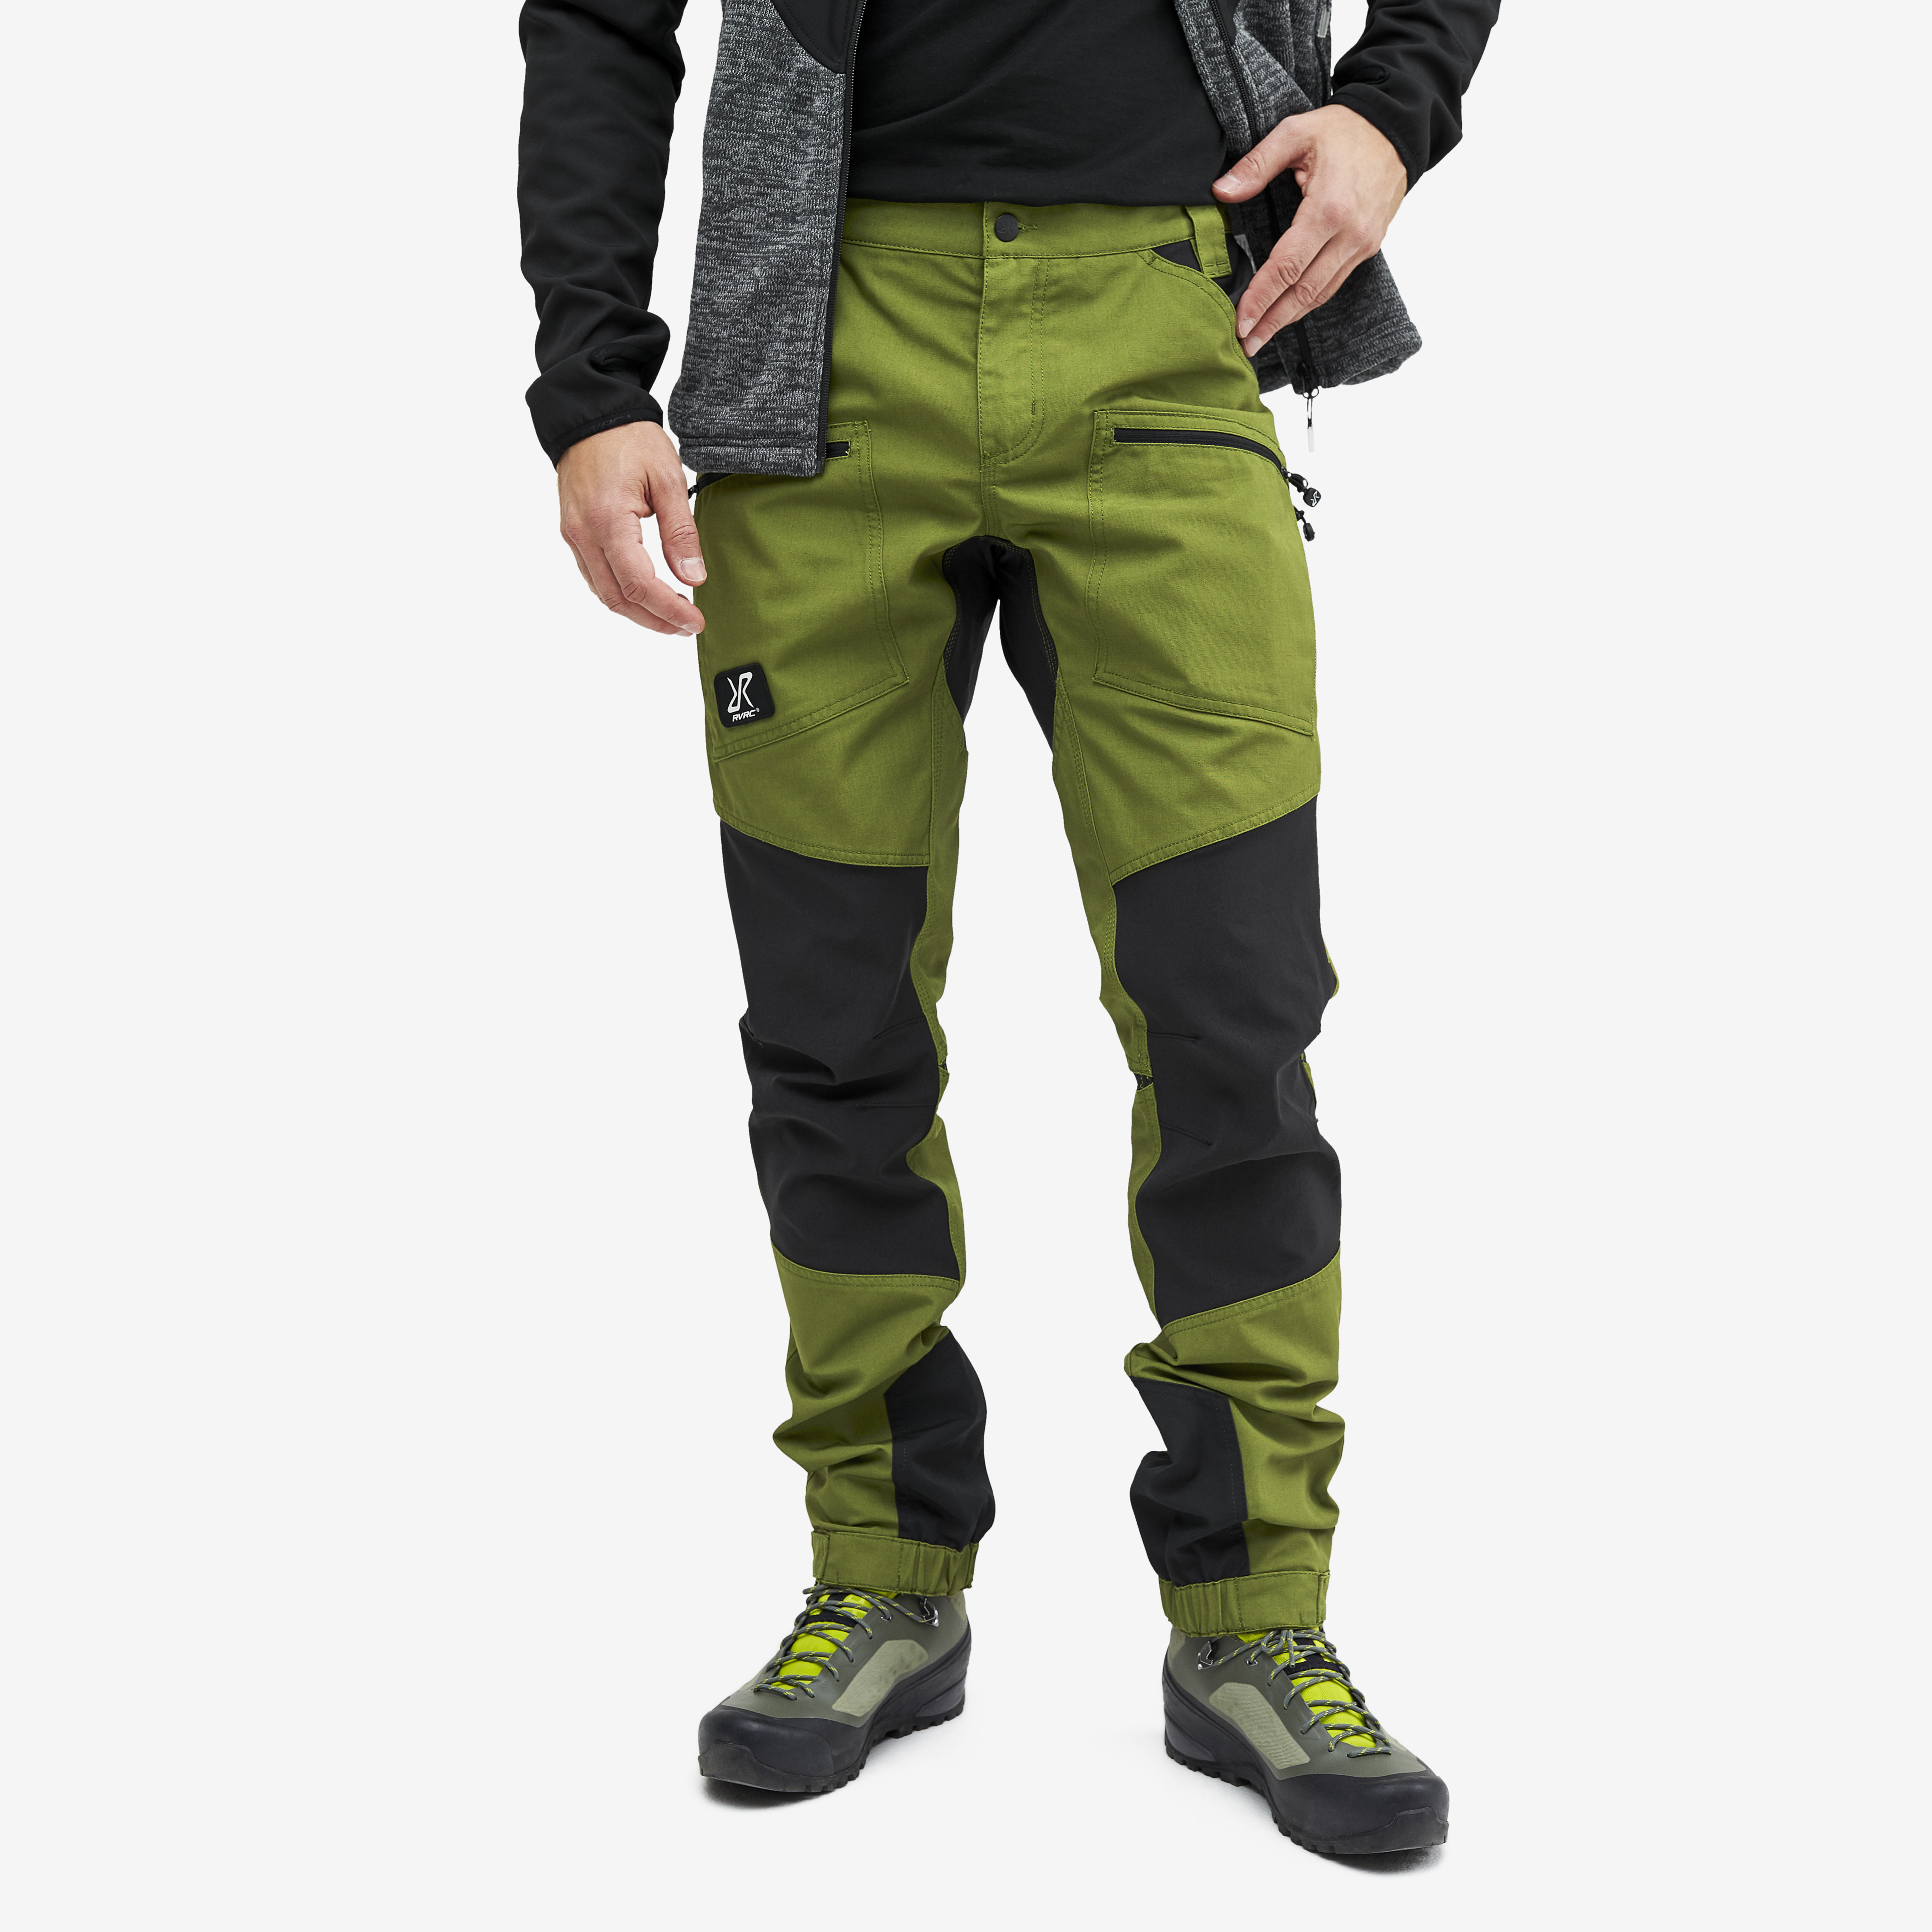 Nordwand Pro Pants Cactus Green Herre